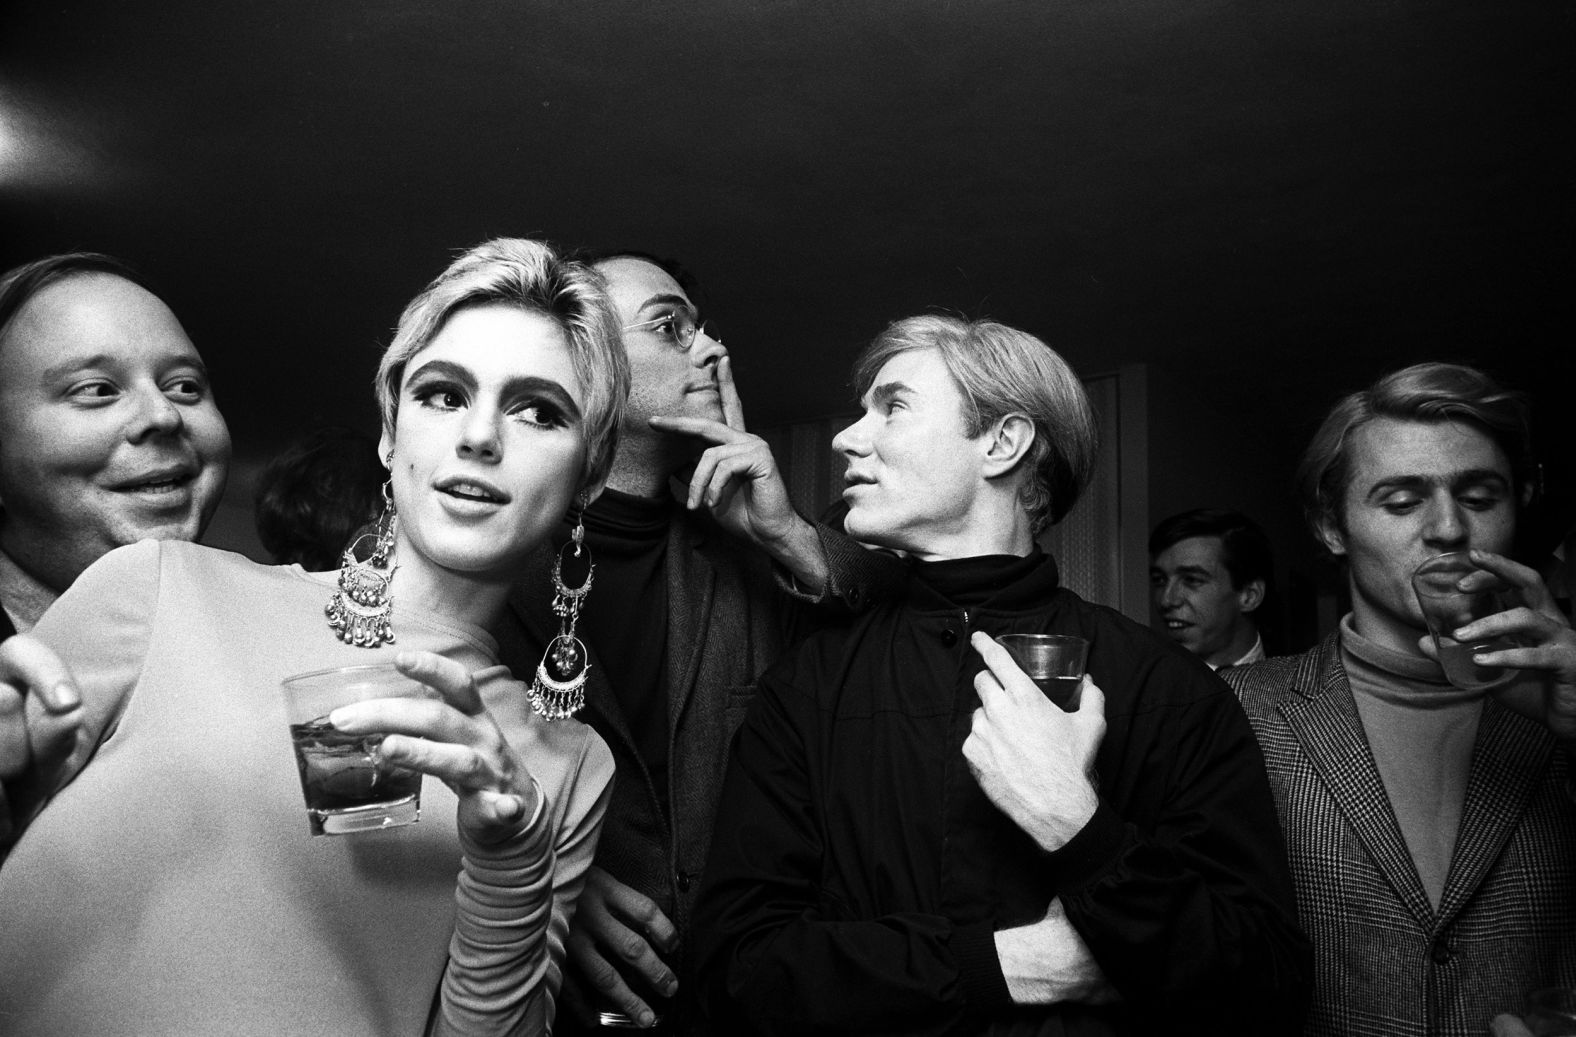 From left, art critic Henry Geldzahler, actress Edie Sedgwick, actor Fu-Fu Smith, artist Andy Warhol and poet Gerard Malanga attend a party in New York in 1965.